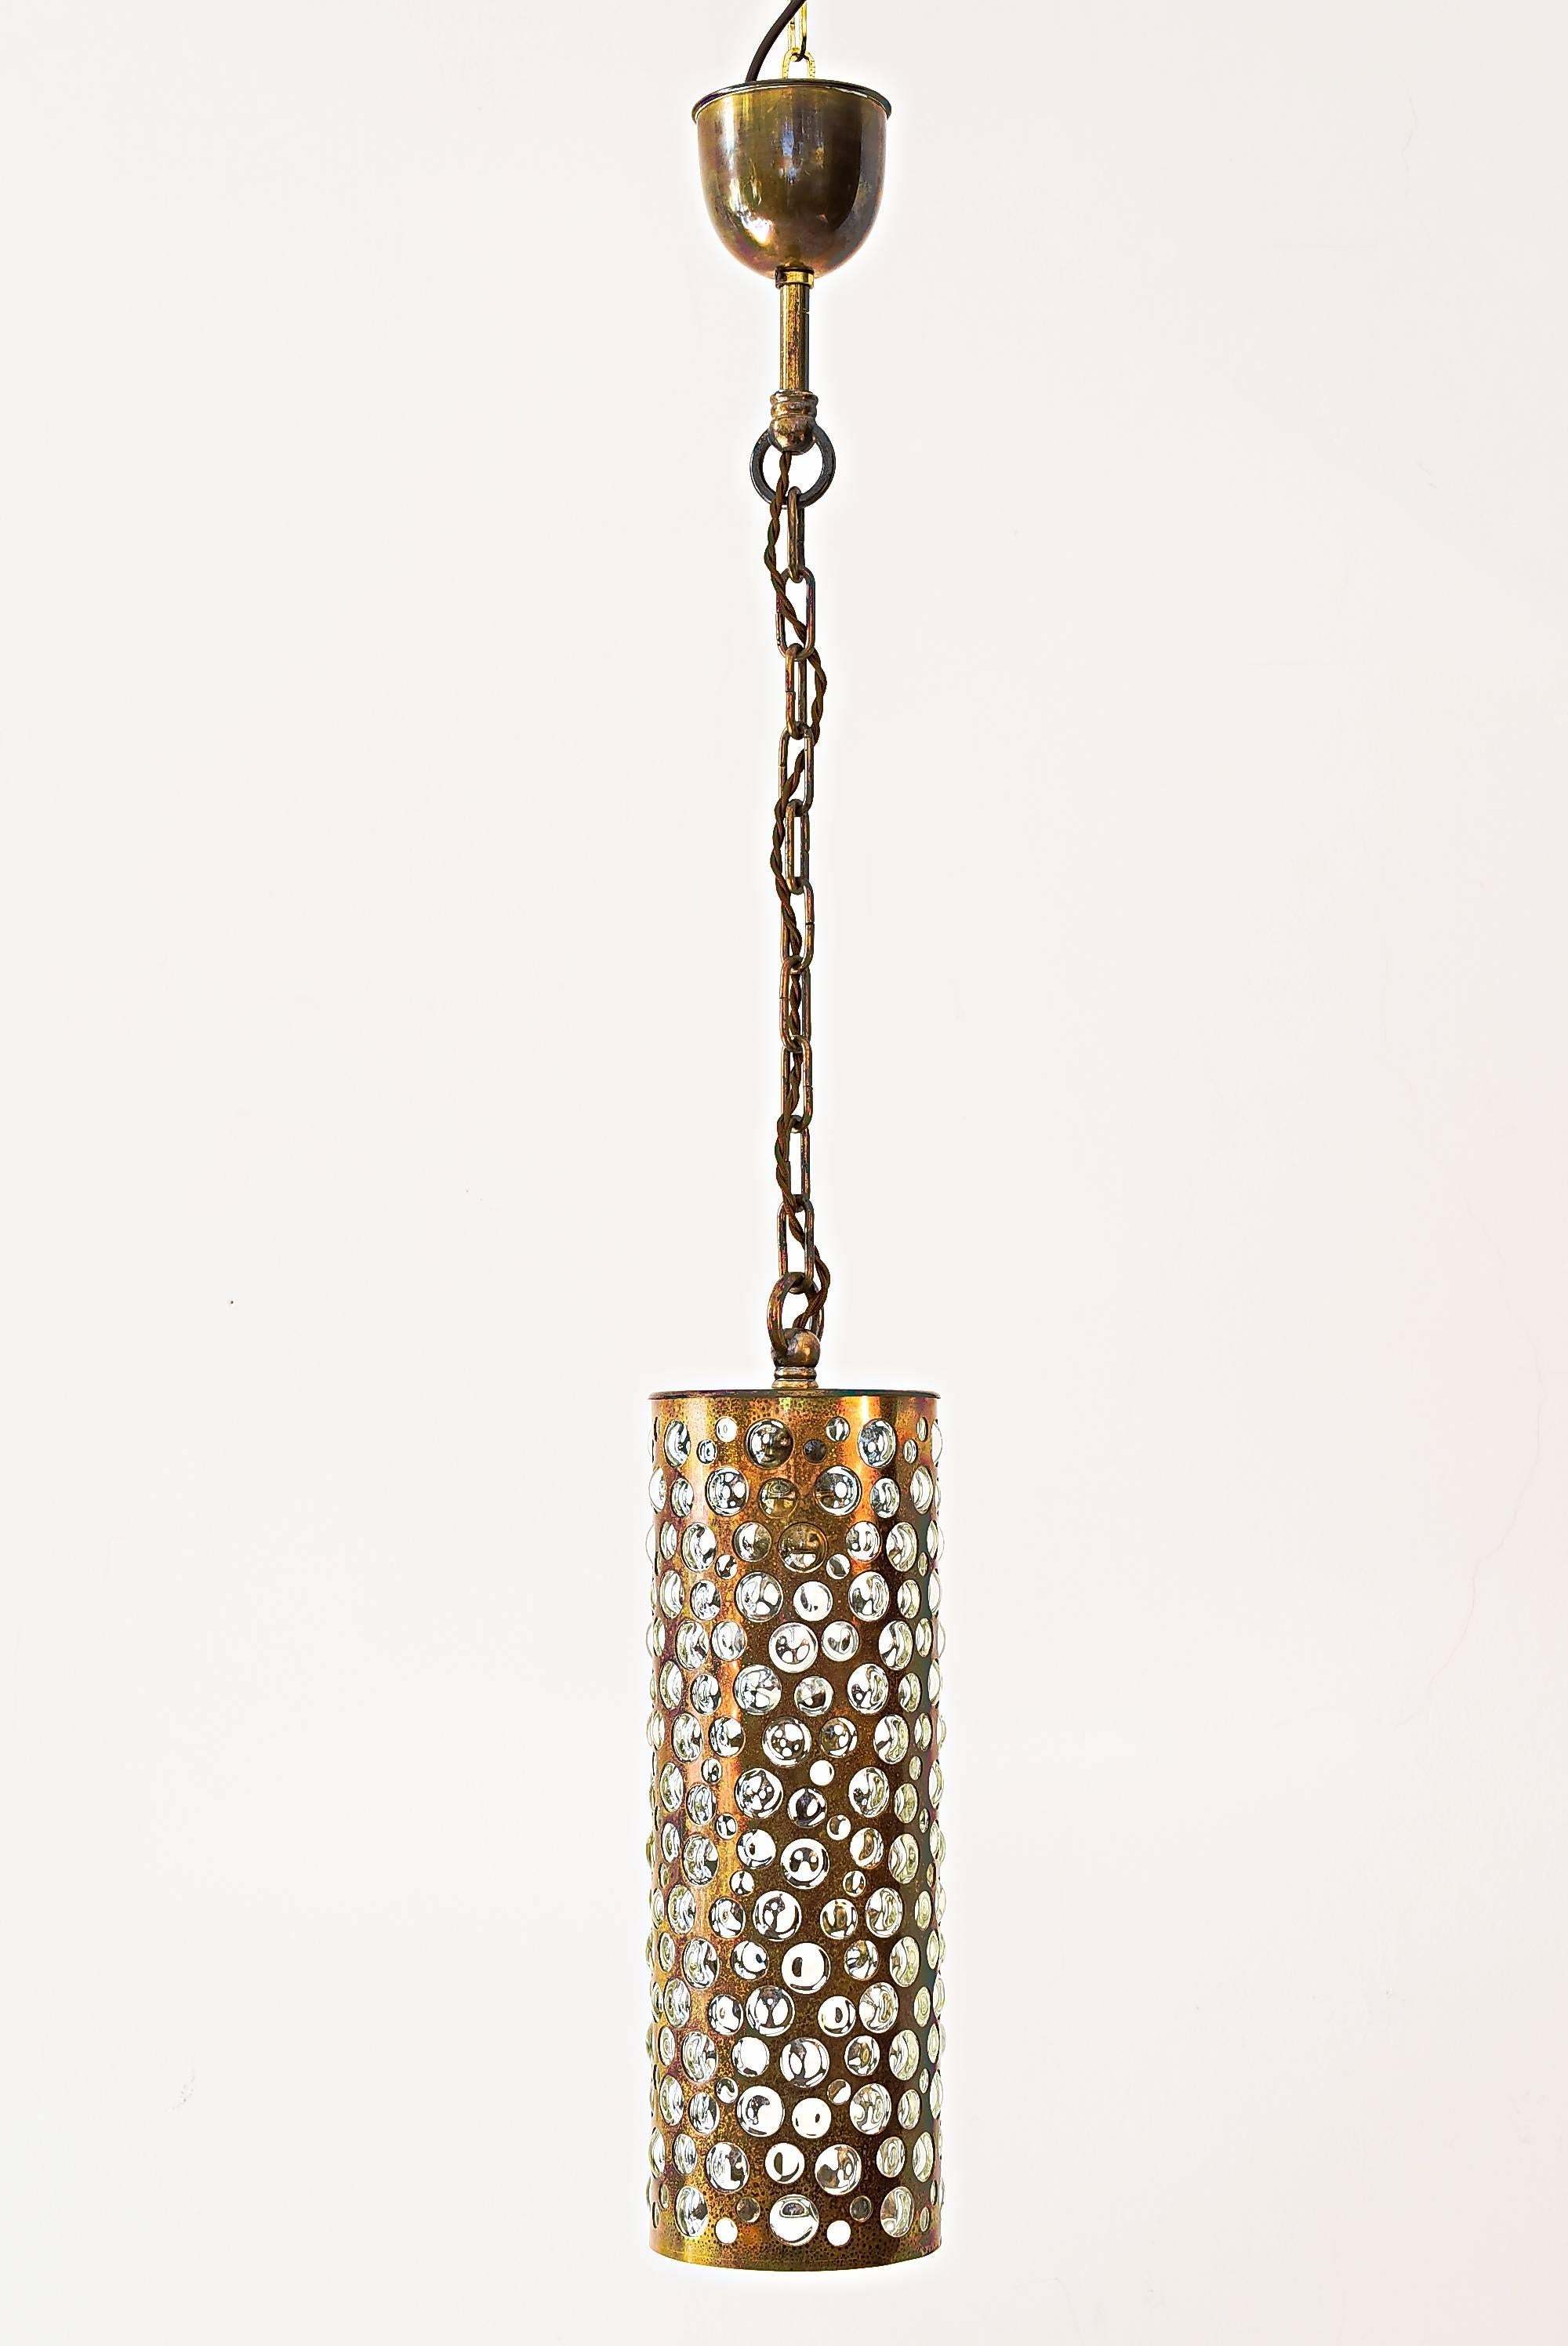 This fixture features handblown bubble and textured glass piercing through a patinized (bronze colored) metal sheet. The hardware is made from brass.
Measures: Complete high is 90 cm.
Glass high is 36 cm.
Glass diameter is 12 cm.